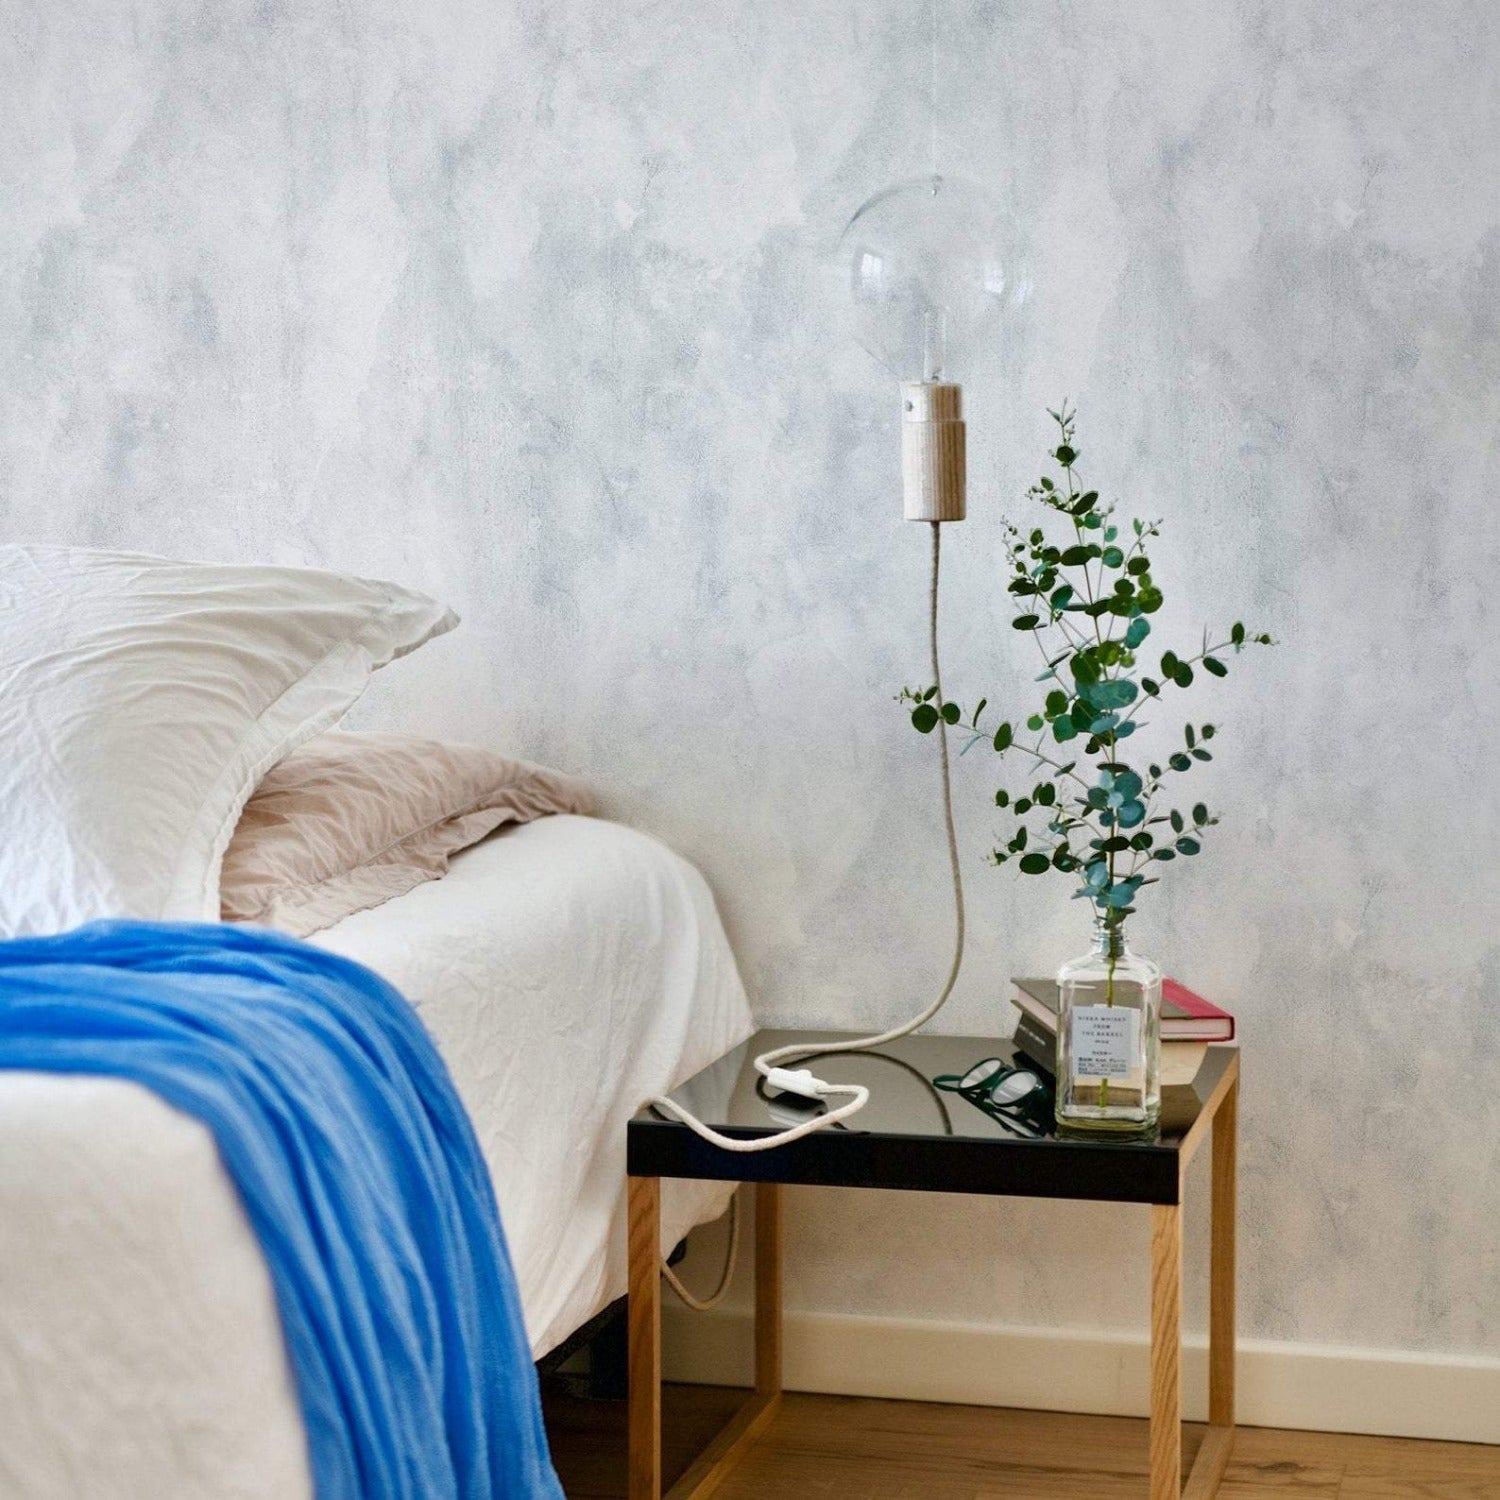 Bedroom interior featuring Blue Limewash Texture Wallpaper with a subtle, cloudy texture. The room includes a bed with white and beige bedding, a bright blue throw, a bedside table with a vase of greenery, and a modern pendant light, creating a tranquil and stylish ambiance.